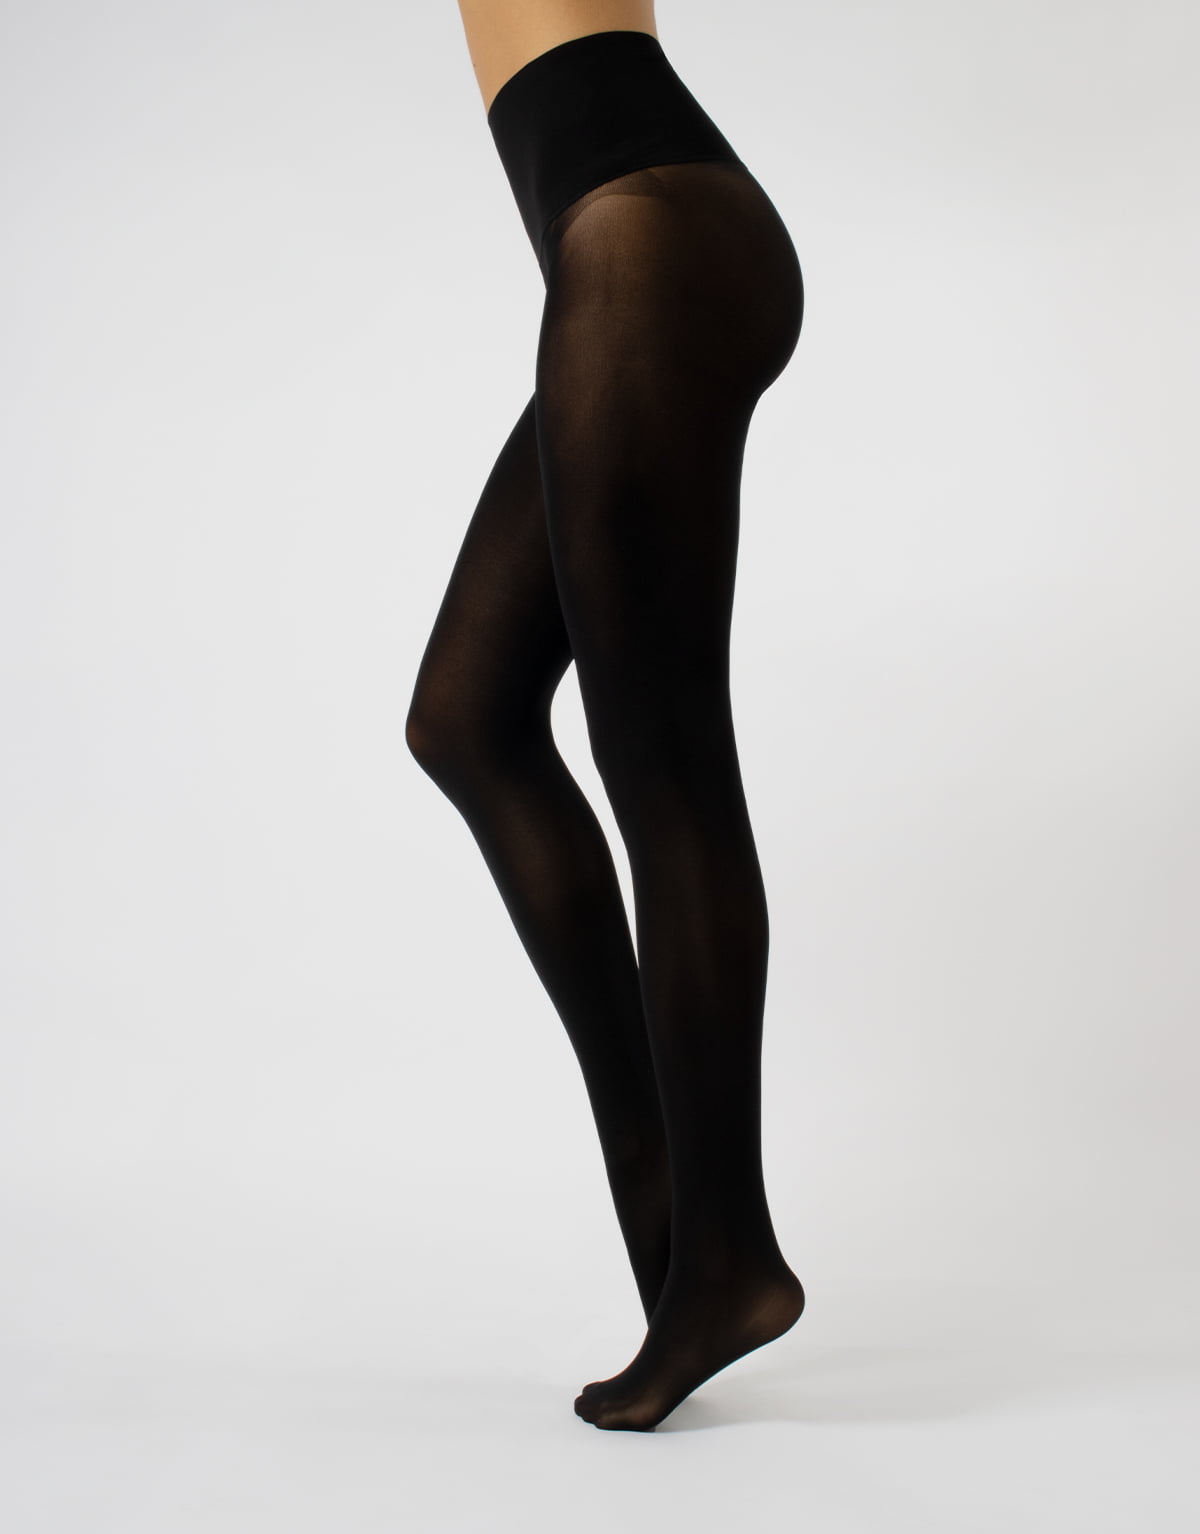 Gipsy Synthetic 50 Denier Tights in Black Womens Clothing Hosiery Tights and pantyhose 